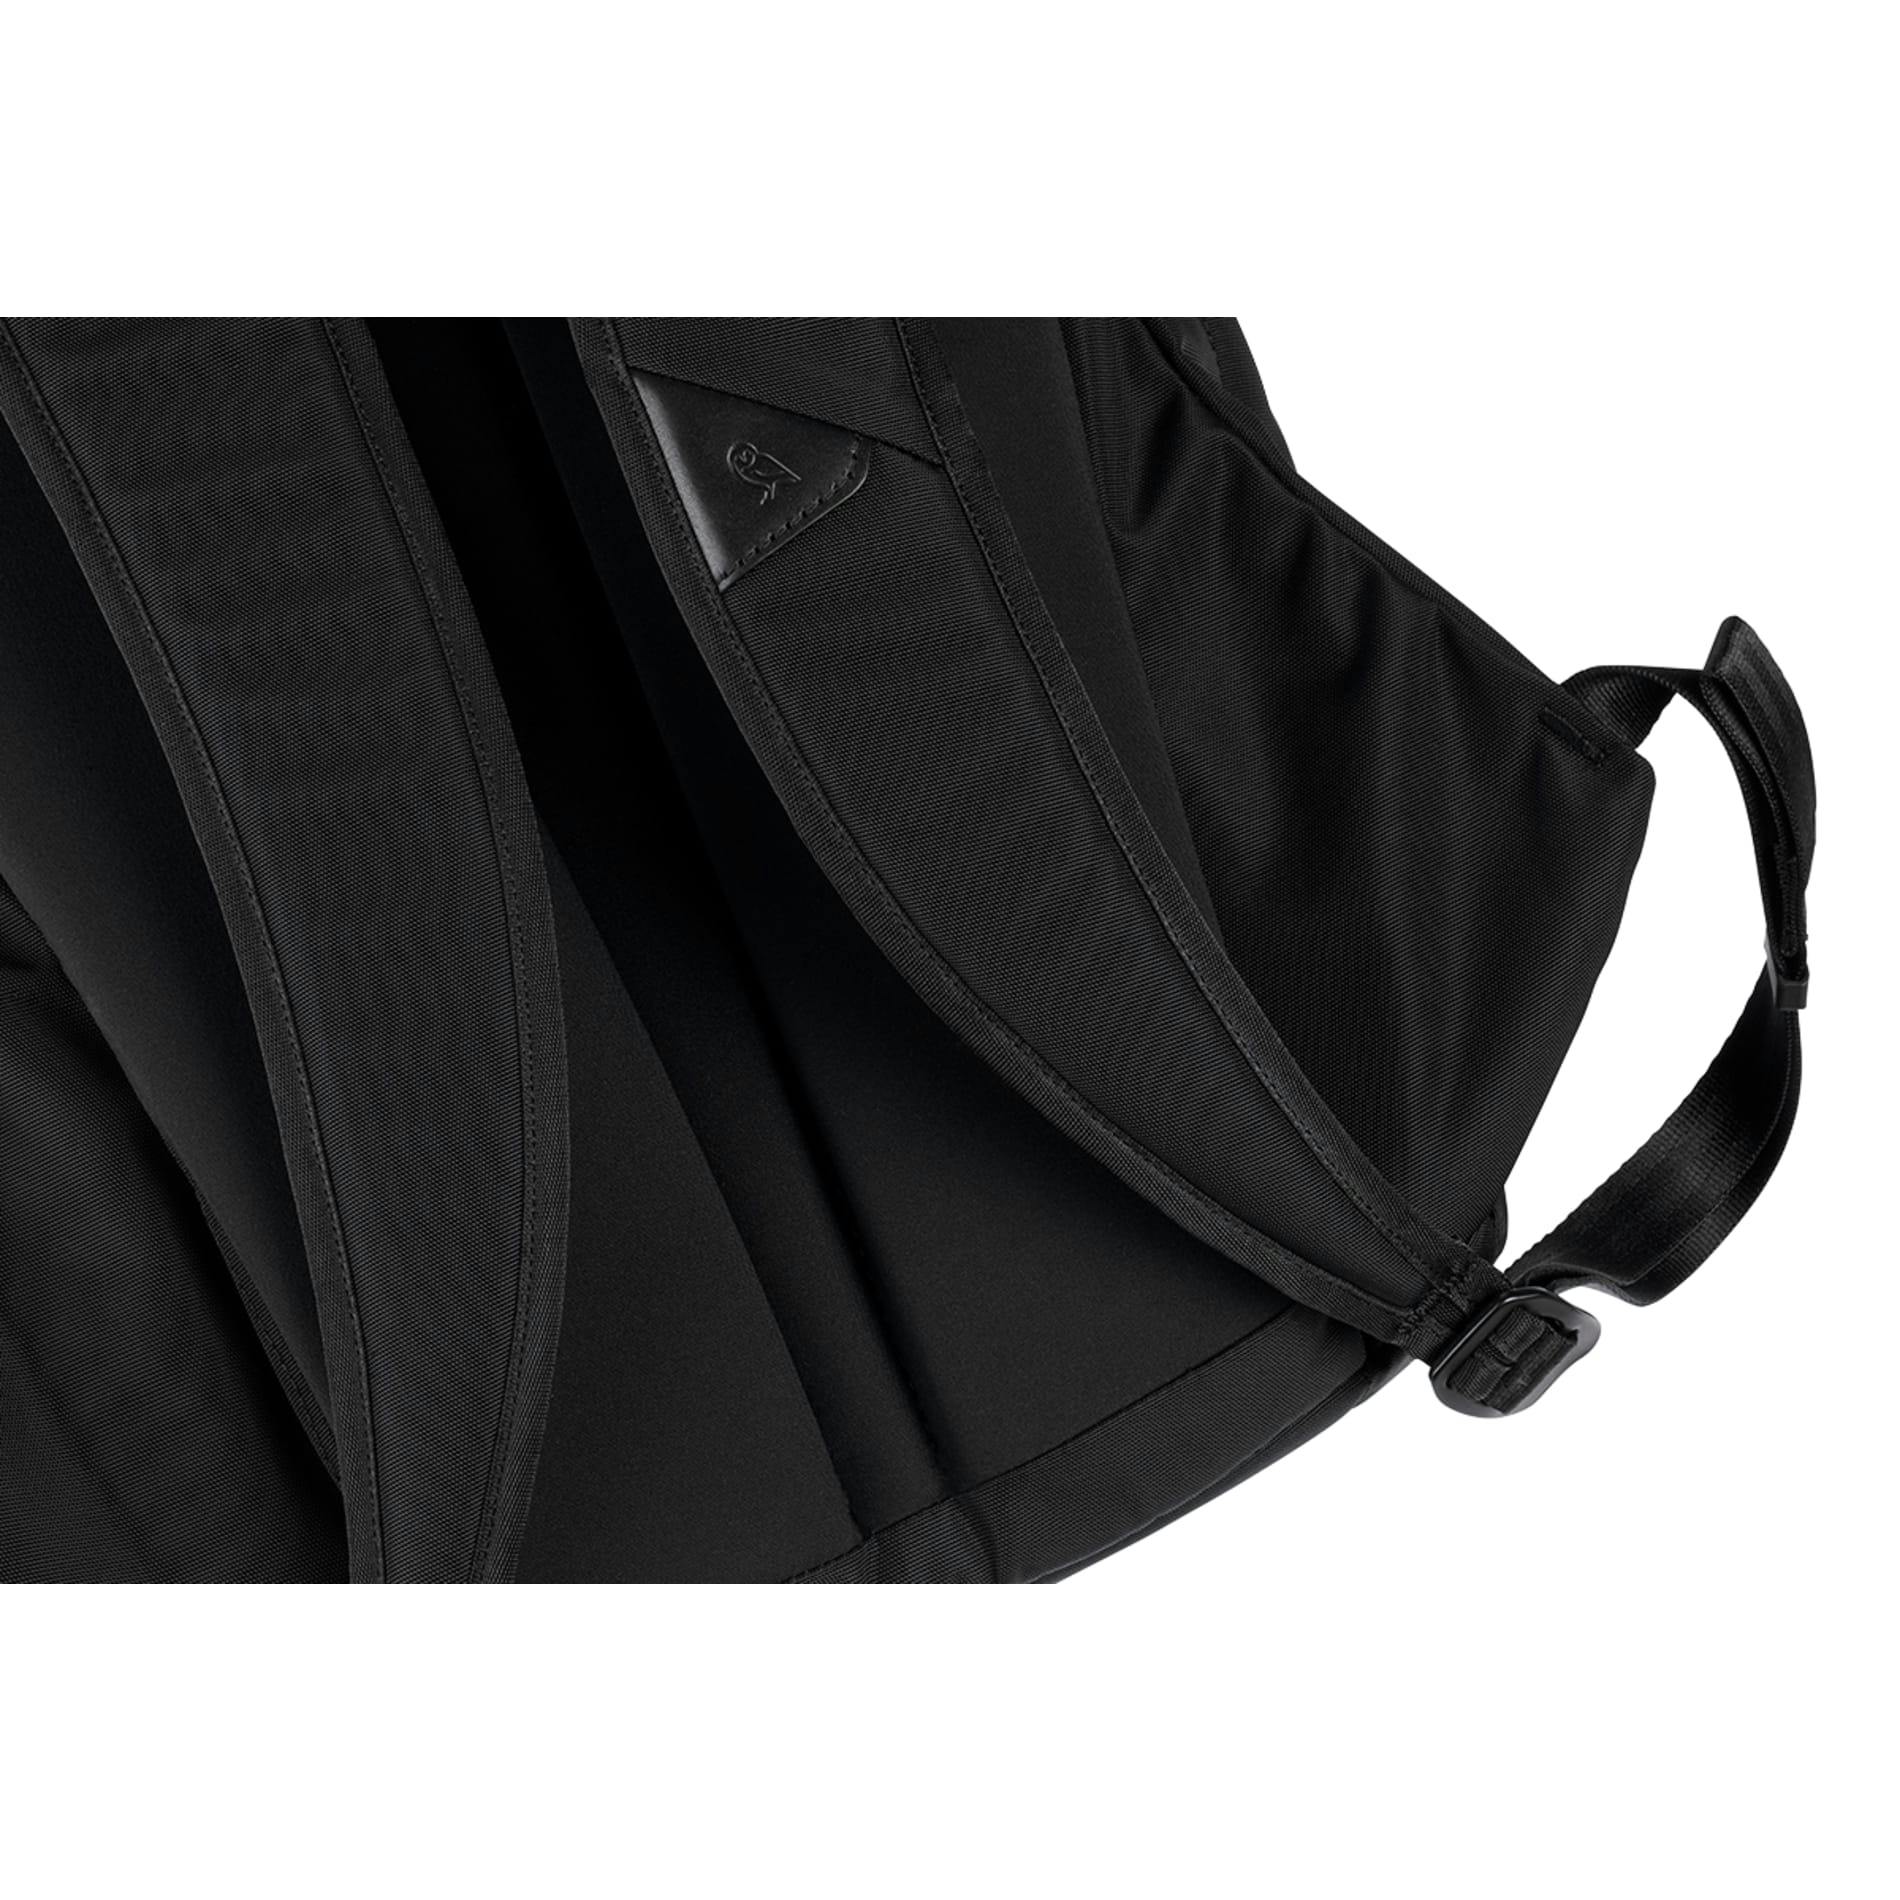 Bellroy Classic 16" Computer Backpack - additional Image 4